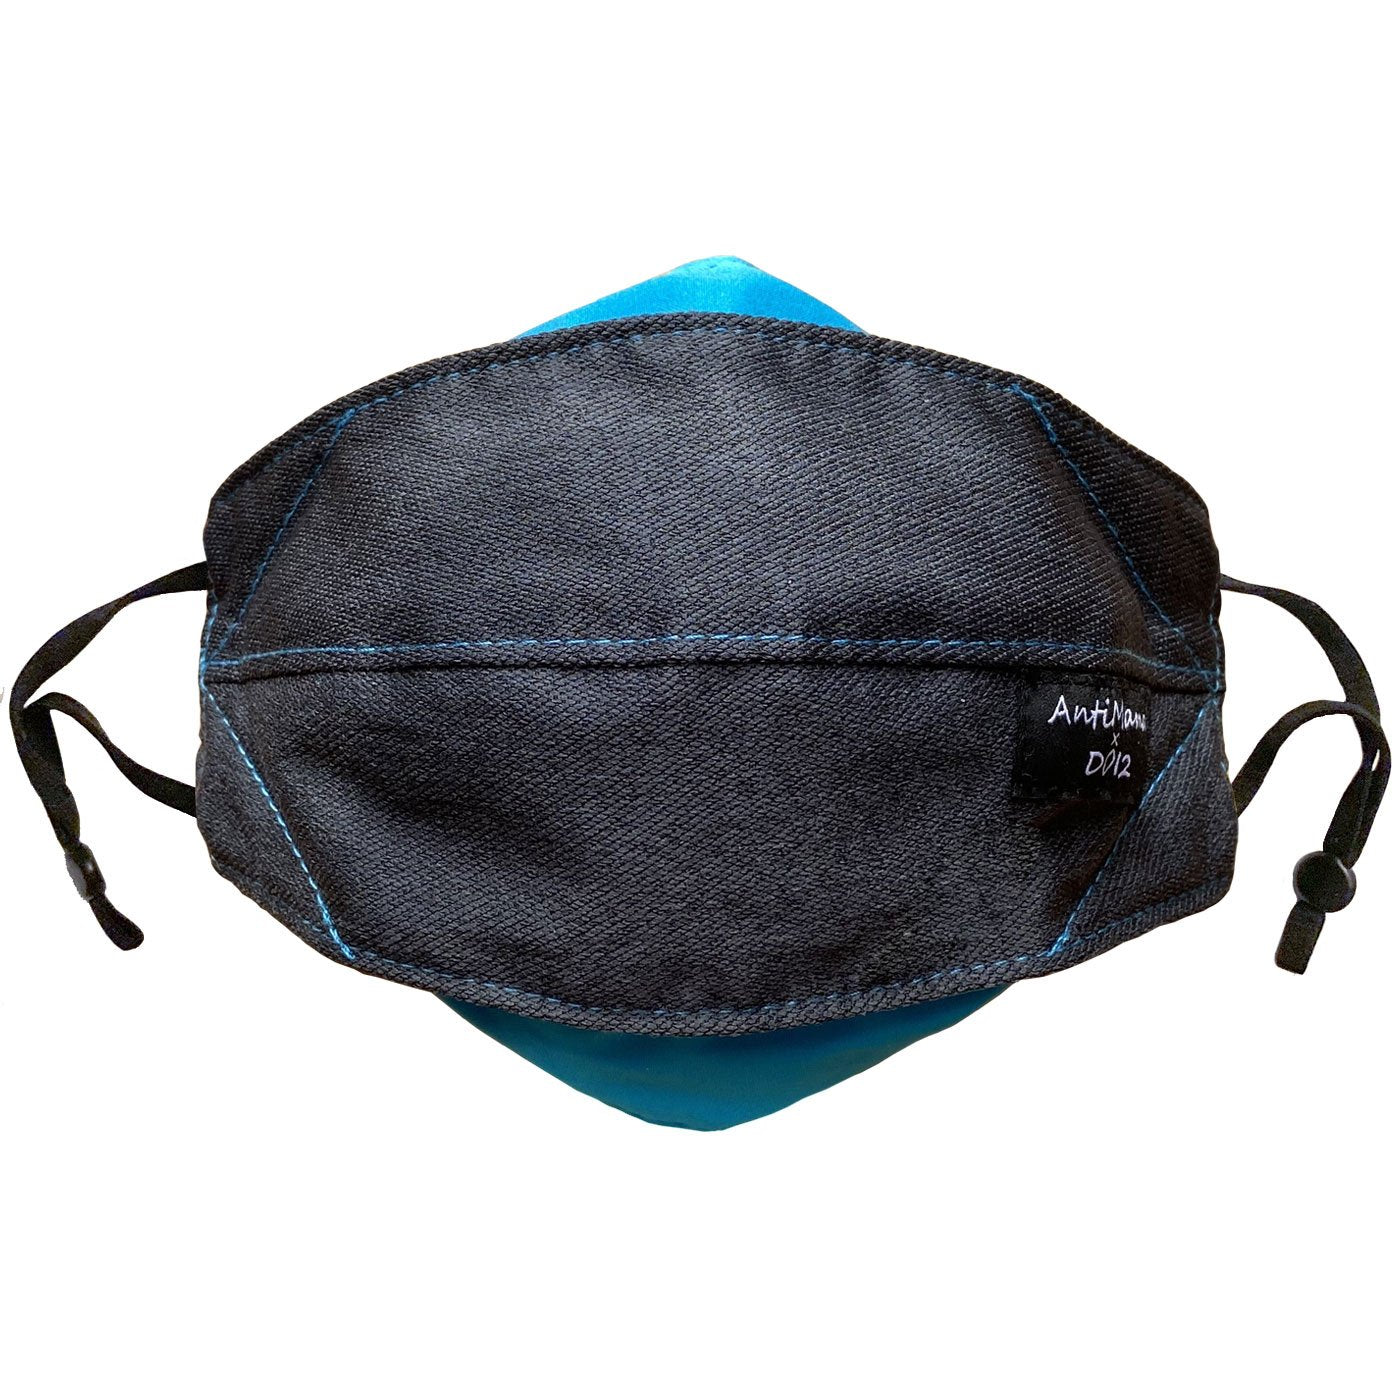 Origami Style Reusable Polyester Cloth Face Mask (Charcoal / Turquoise)